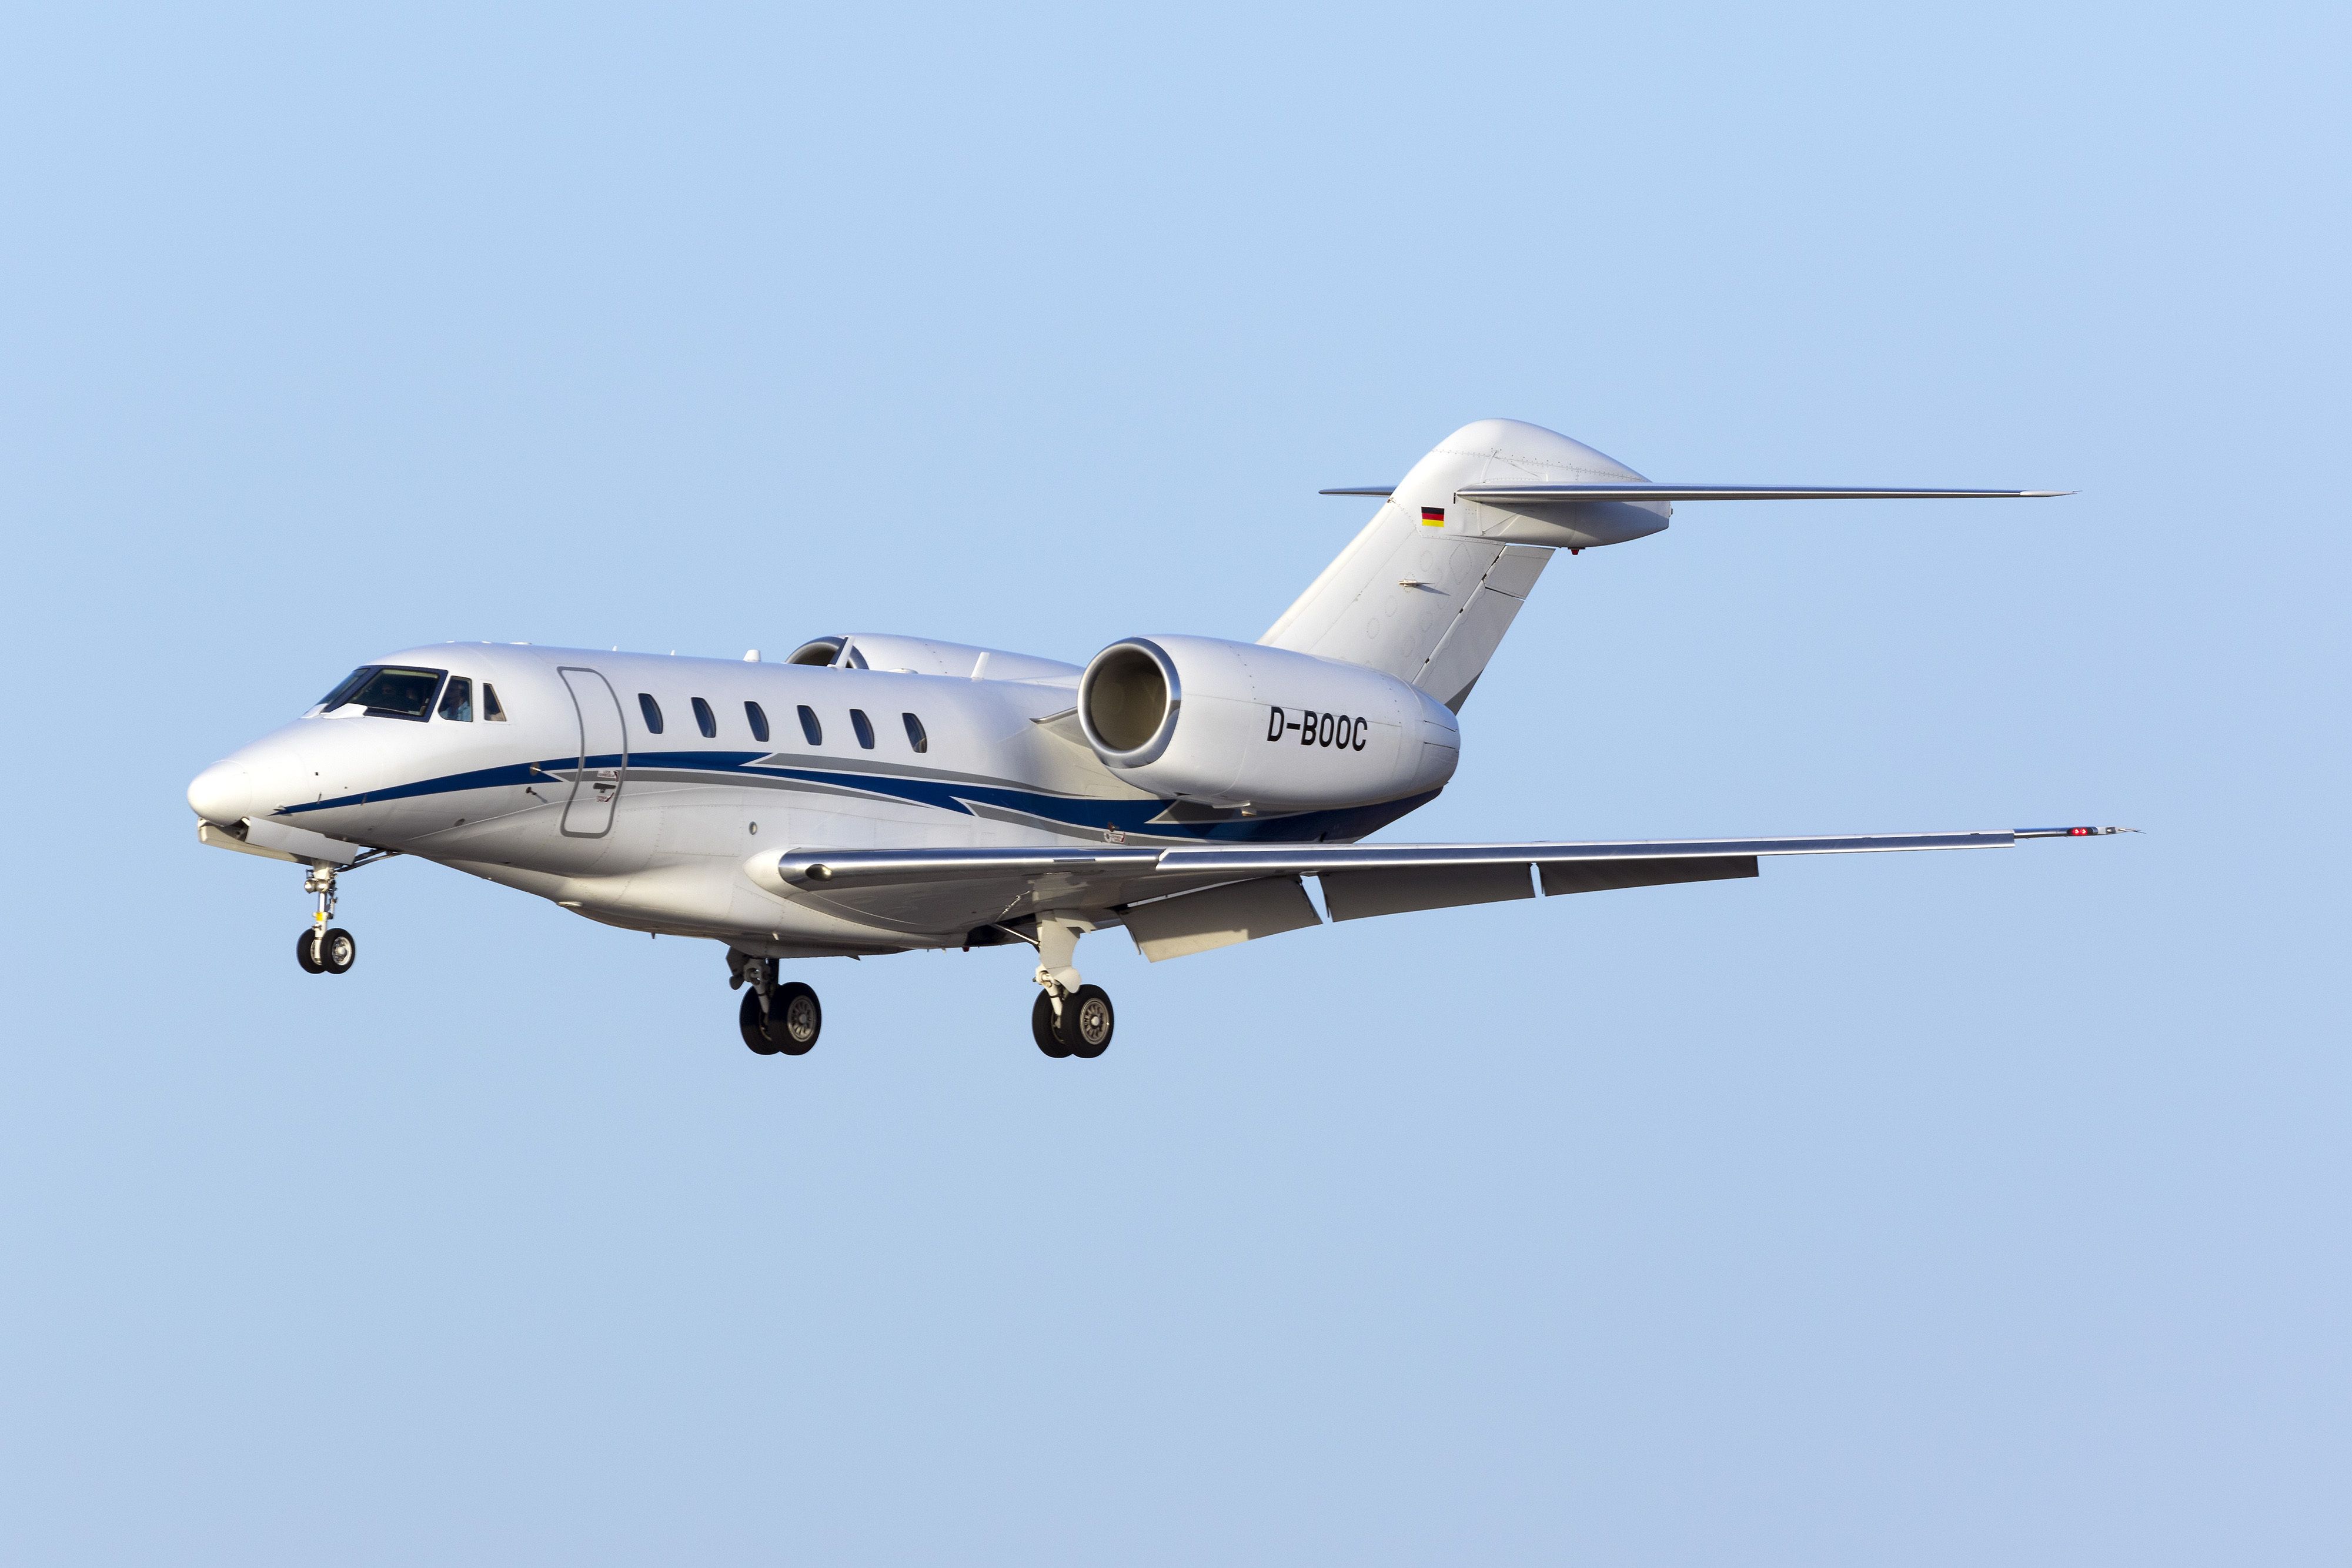 A Cessna Citation X flying in the sky.